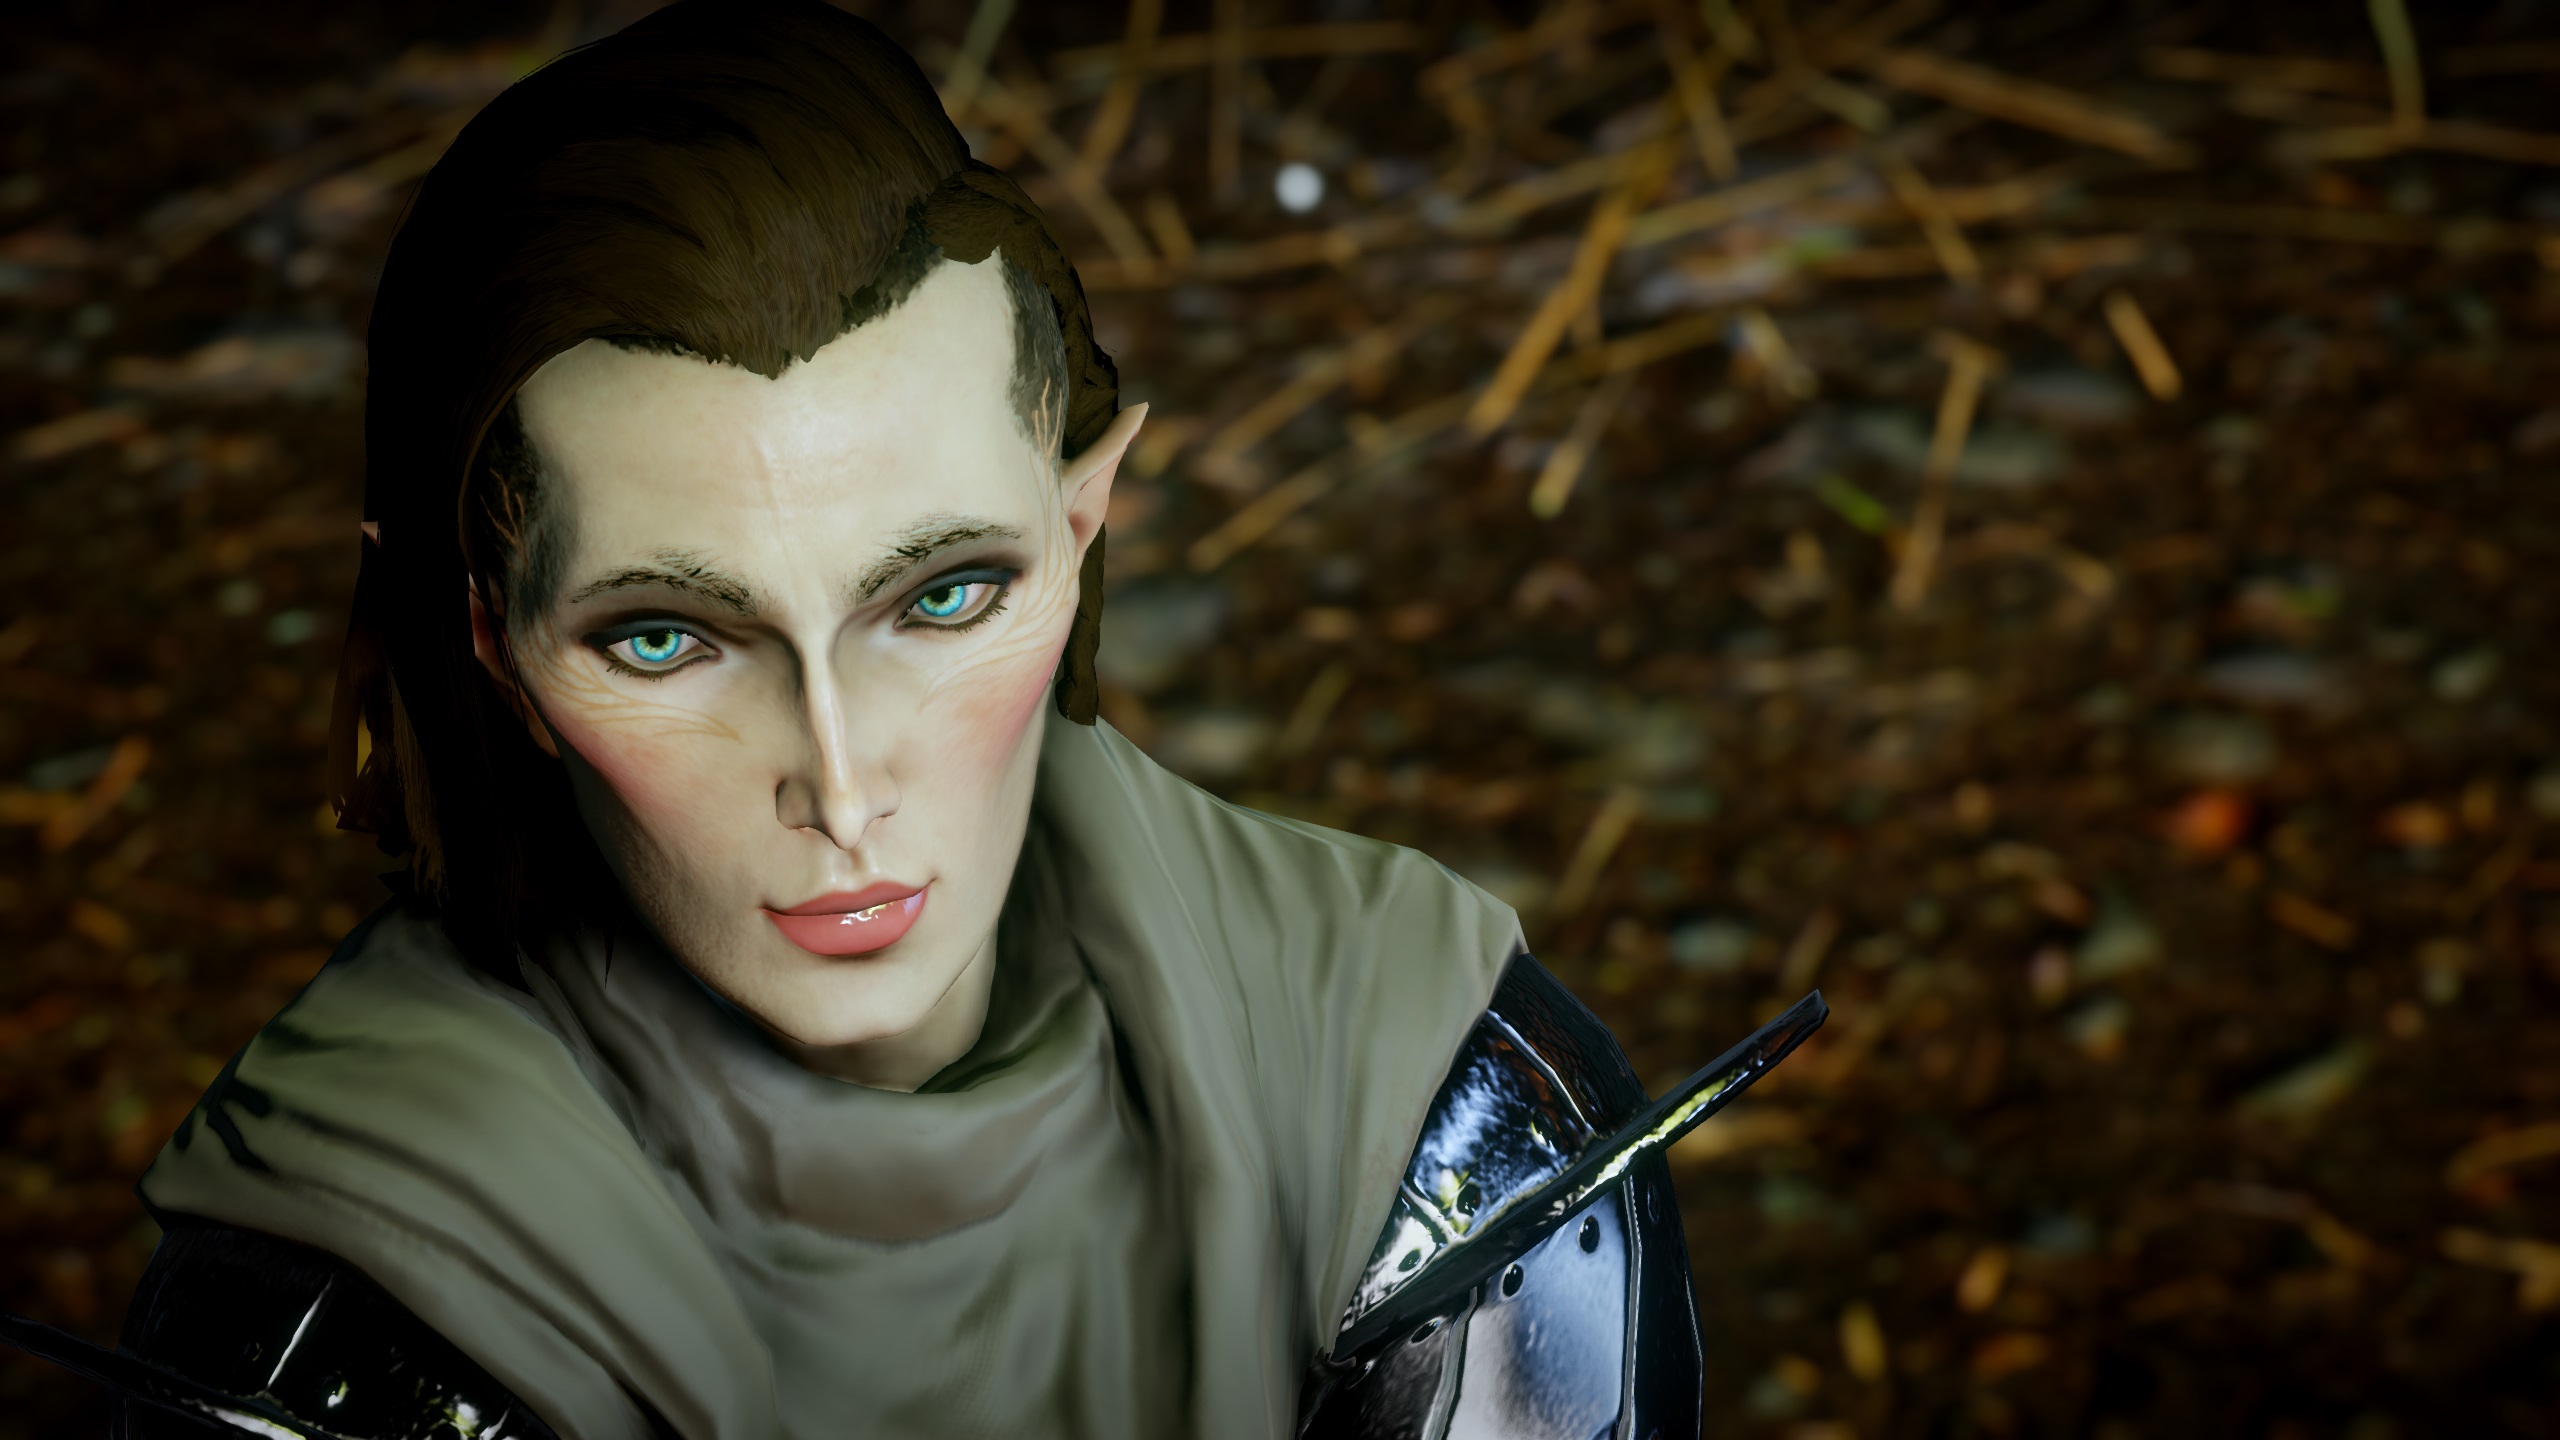  There's no greater shame in an RPG than leaving character creation and finding out you're accidentally hideous 